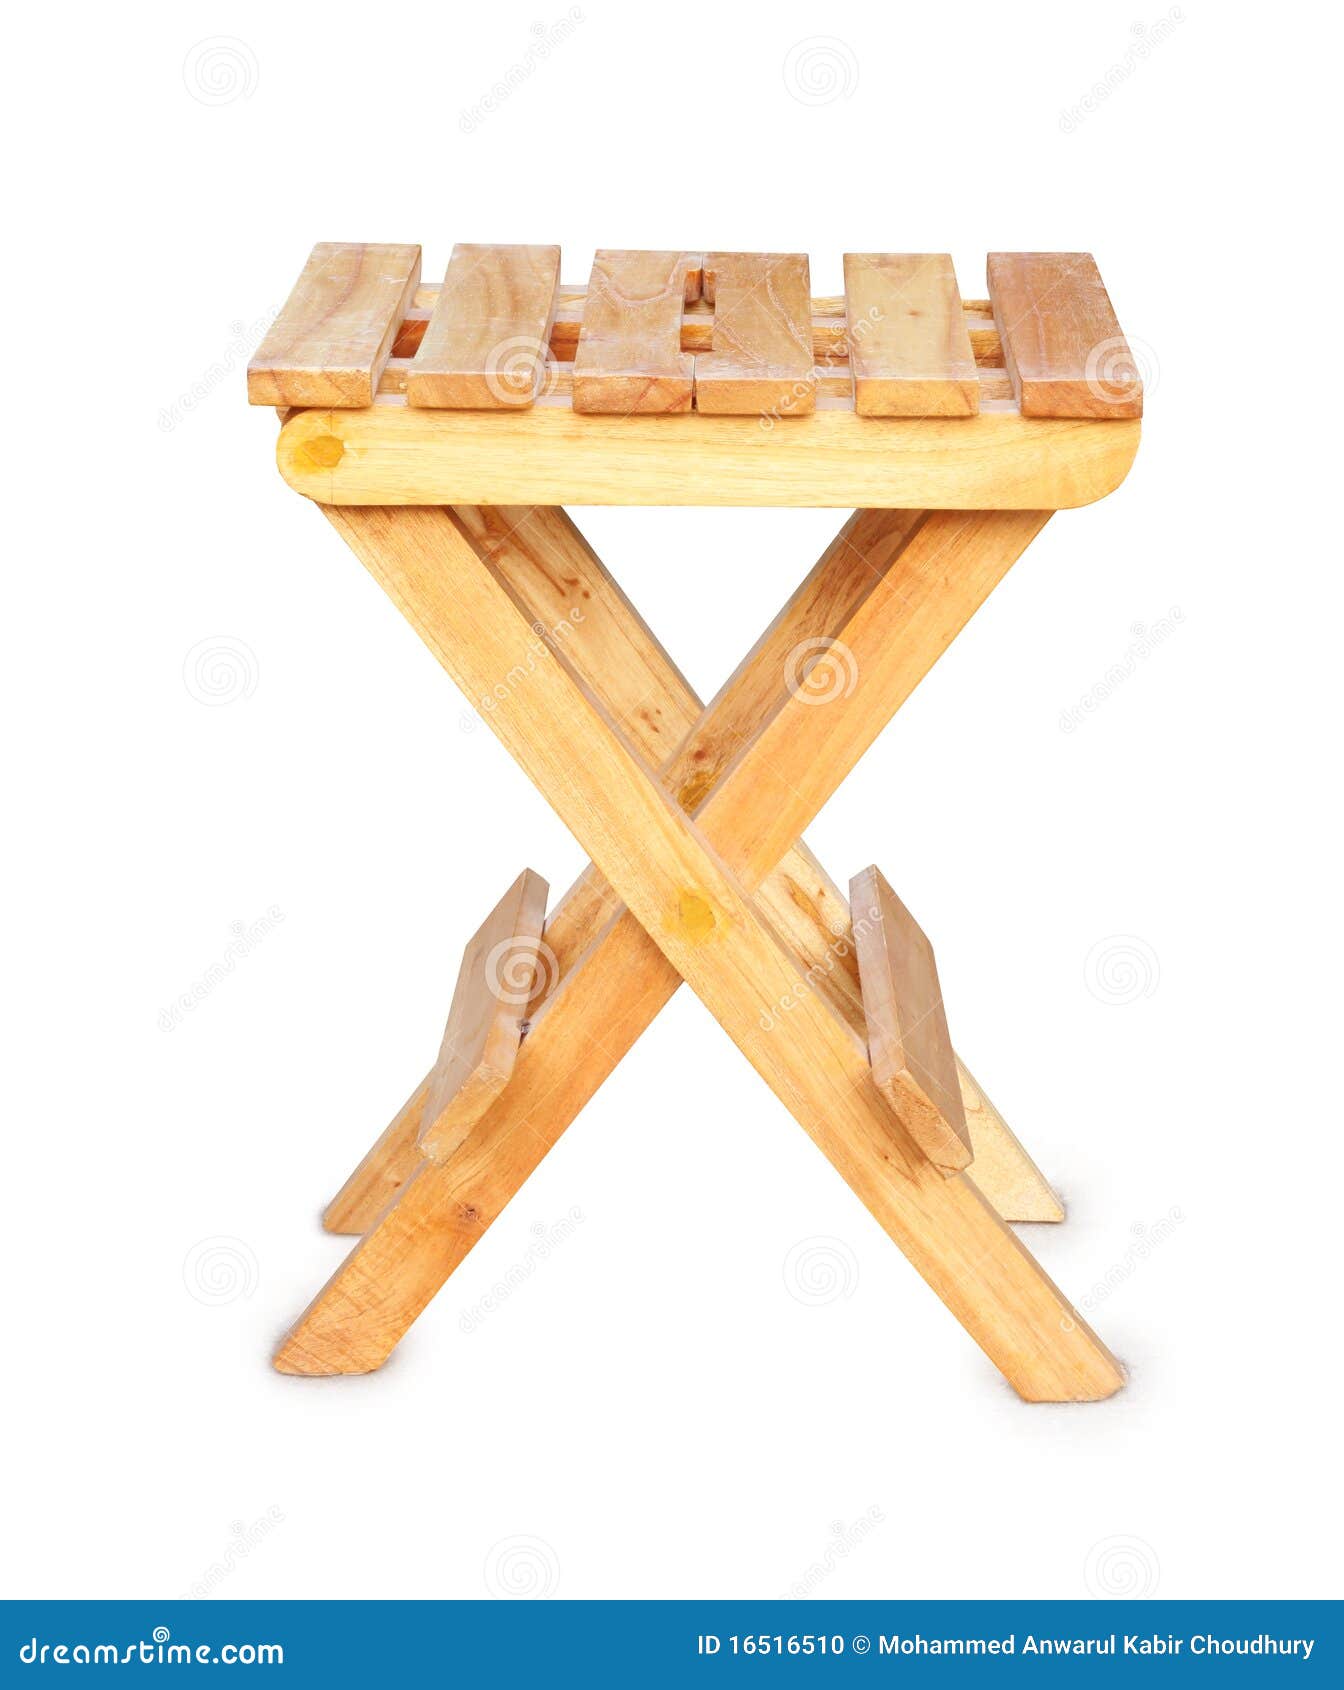 More similar stock images of ` Wooden folding stool `